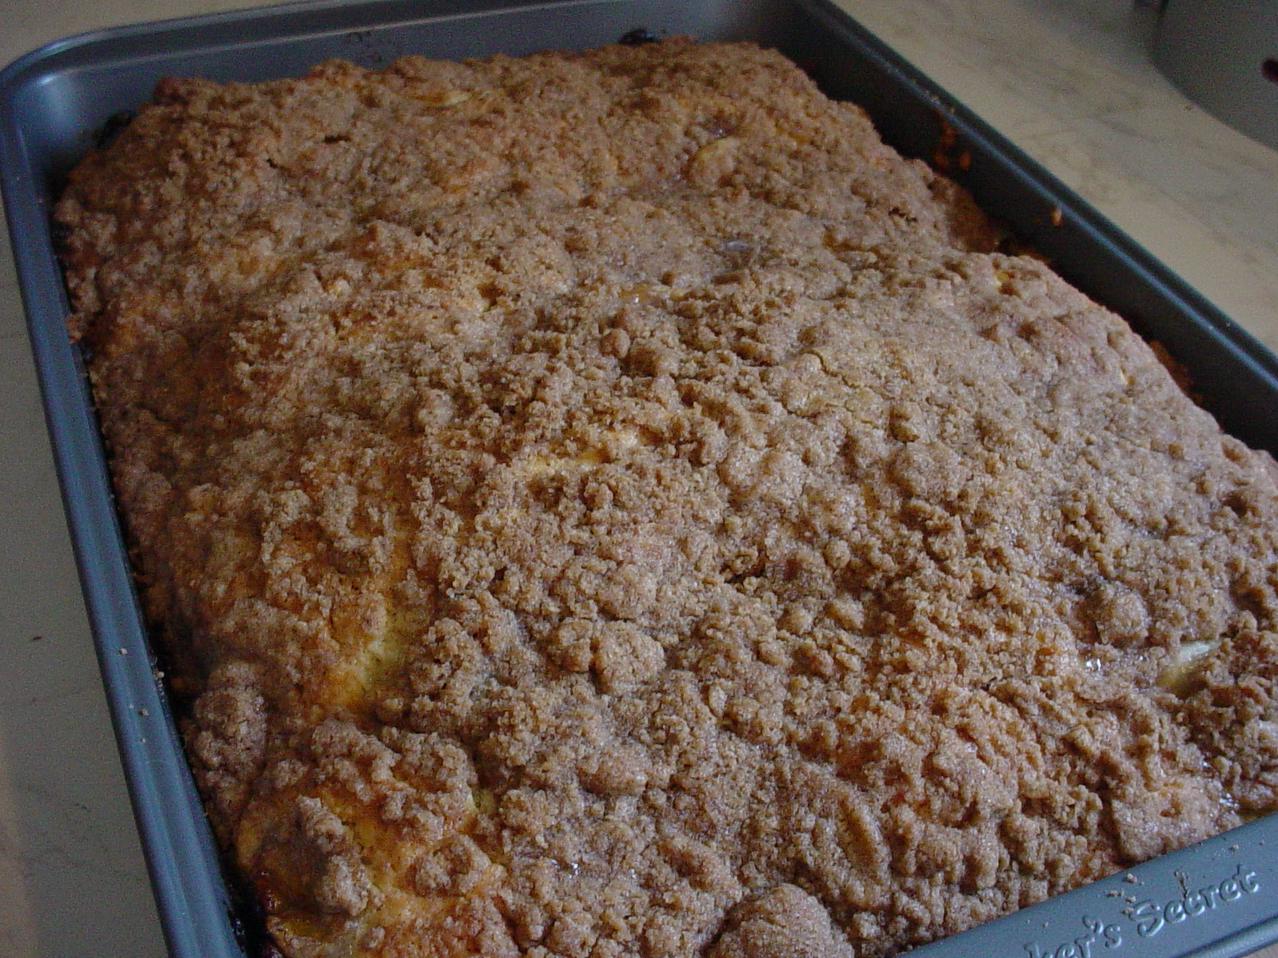  A moist cake filled with banana pieces and topped with a delicious crumbly streusel topping.